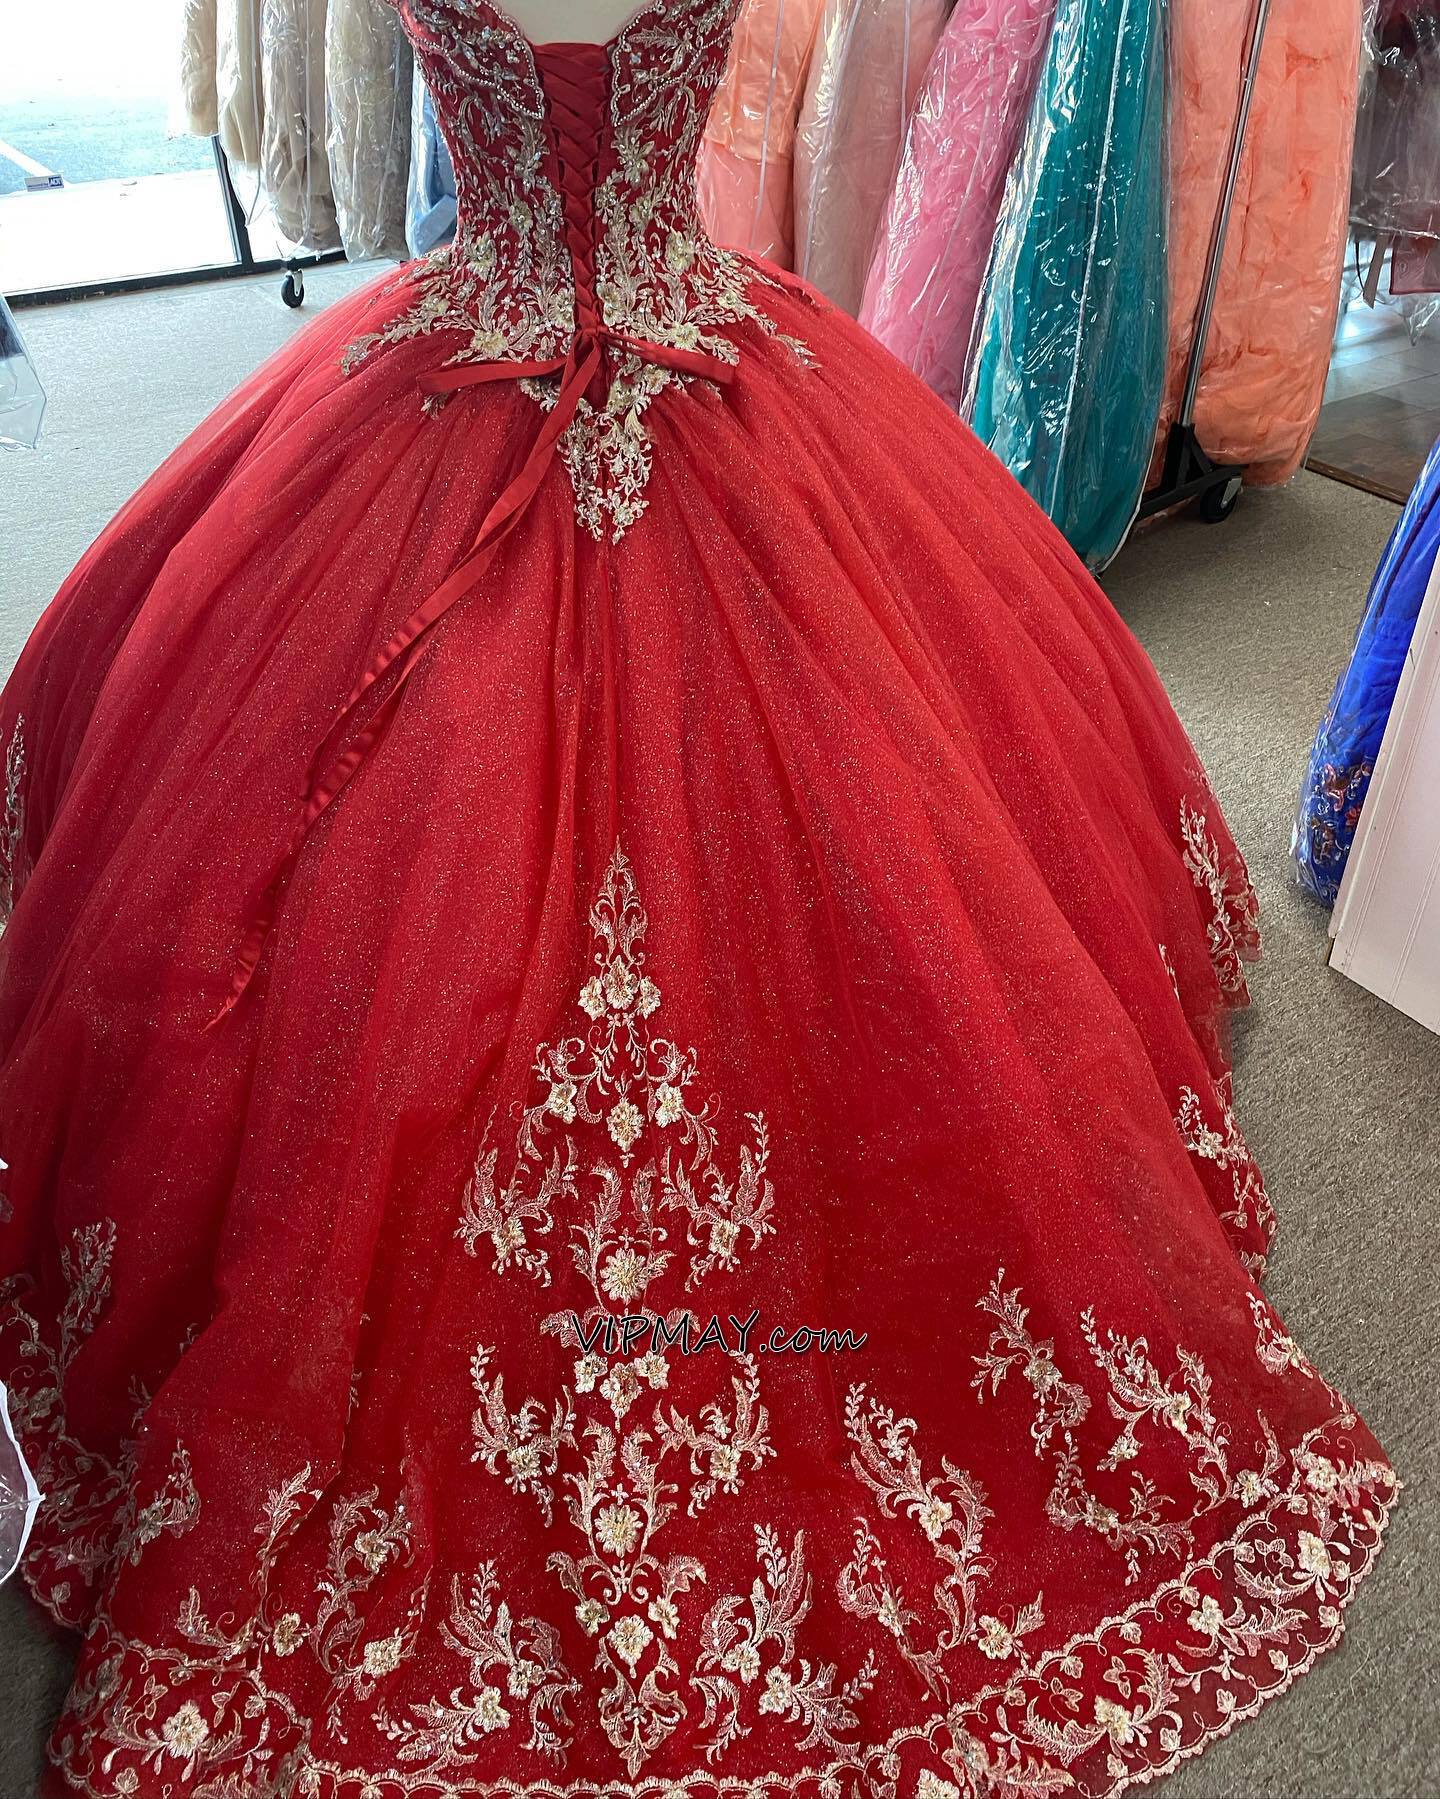 mexico themed quinceanera dress,cinderella quinceanera dress from mexico,red modern quinceanera dress,red quinceanera dress,red quinceanera with gold embroidery,v neckline quinceanera dress,embroidery sweet 16 dress,quinceanera dress with short train,where can i find sparkly quinceanera dress,